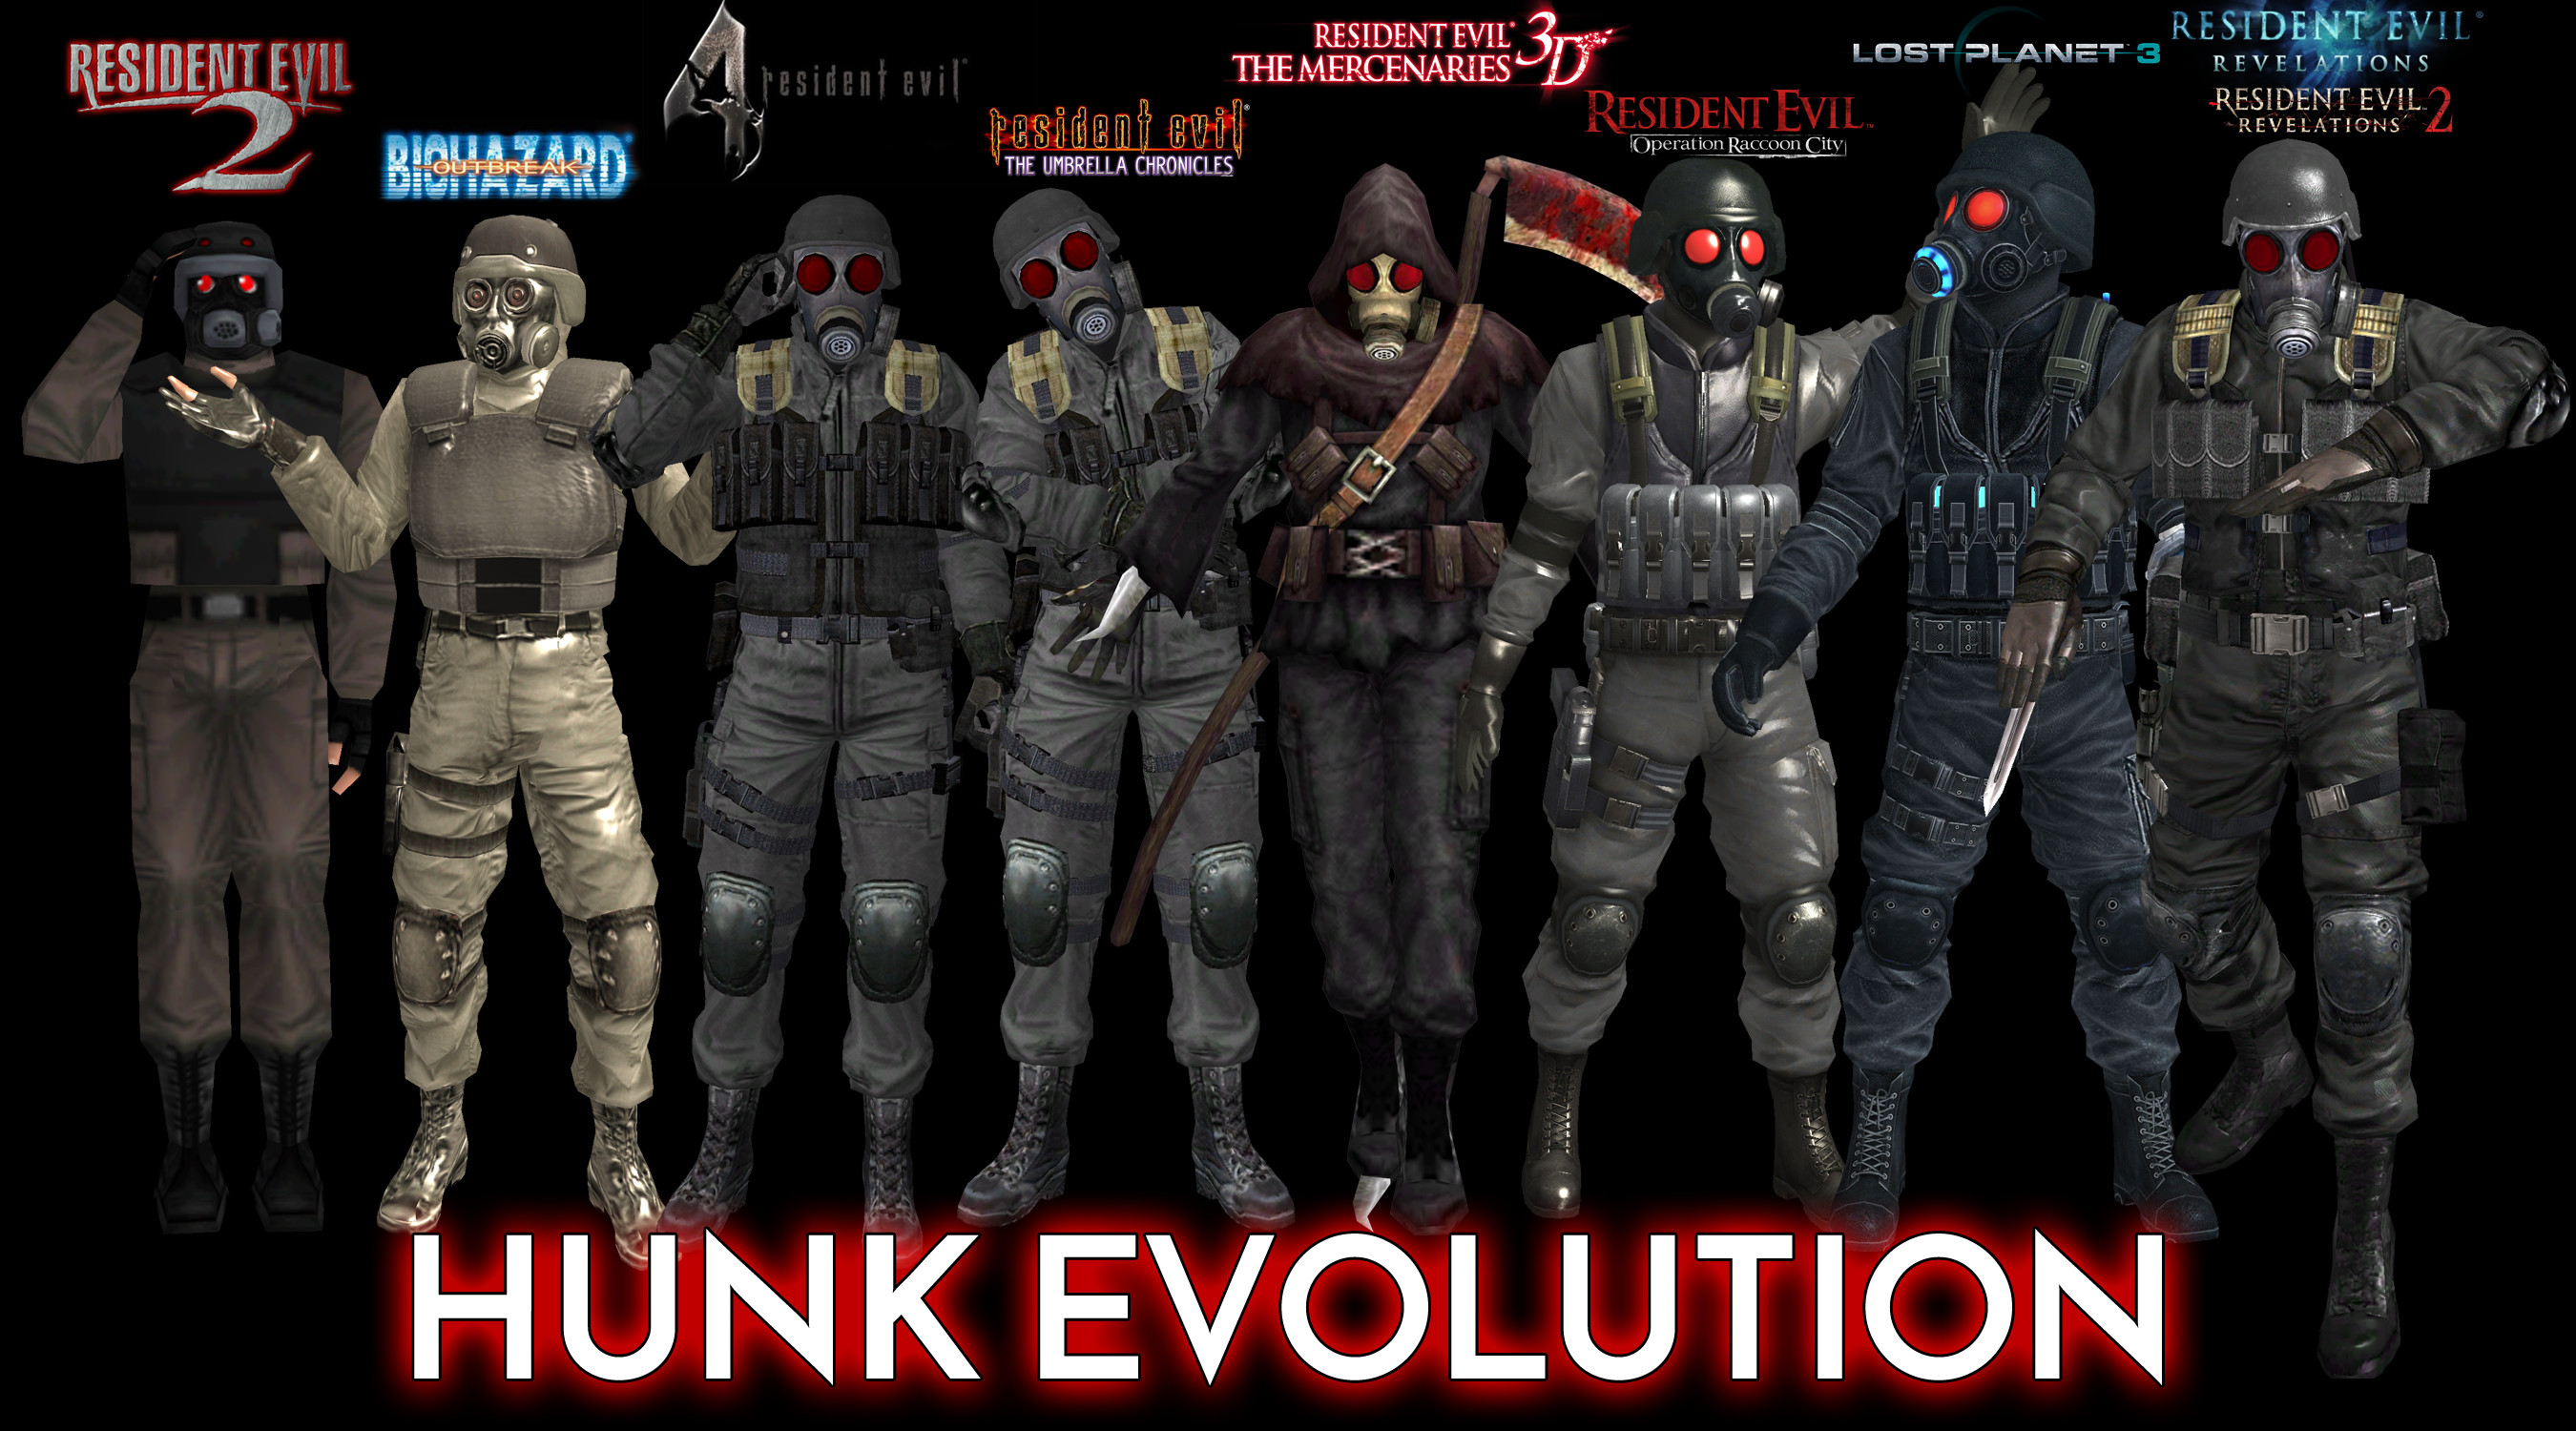 2700x1500 972oTeV 21 10 Resident Evil Hunk Evolution (With Renders [PNG]) by 972oTeV